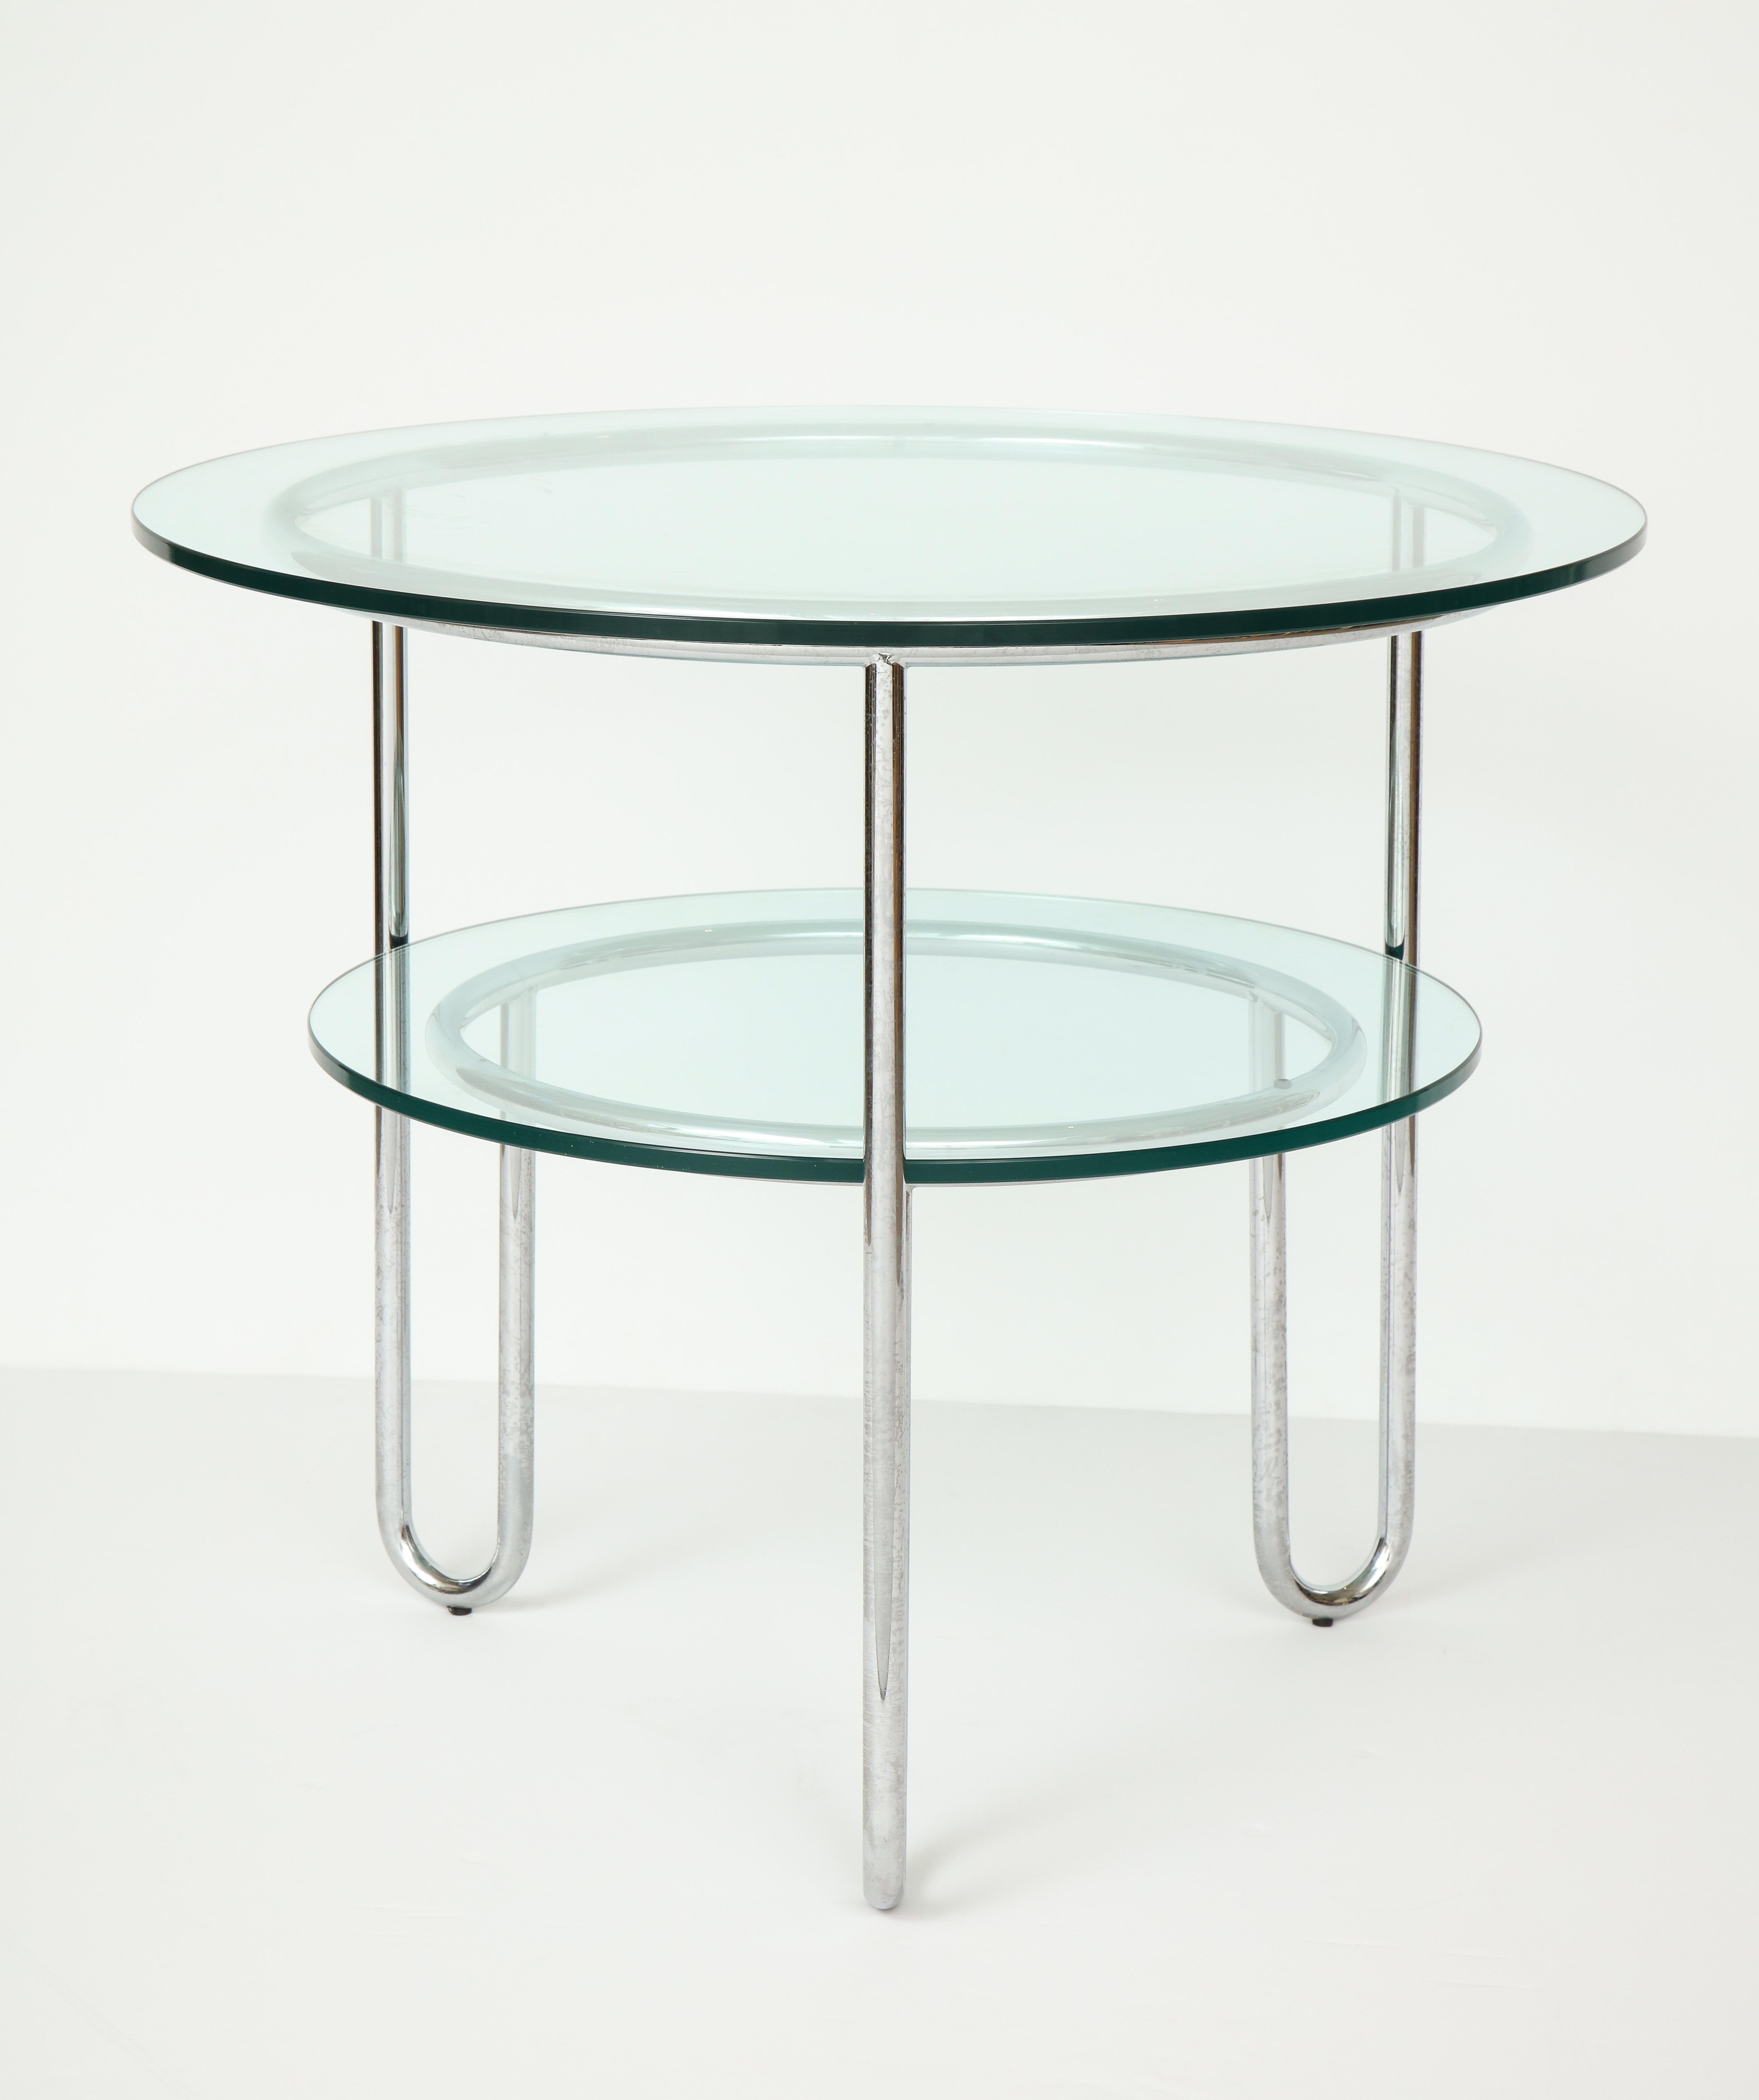 Late 20th Century Pair of Chrome and Glass Tables